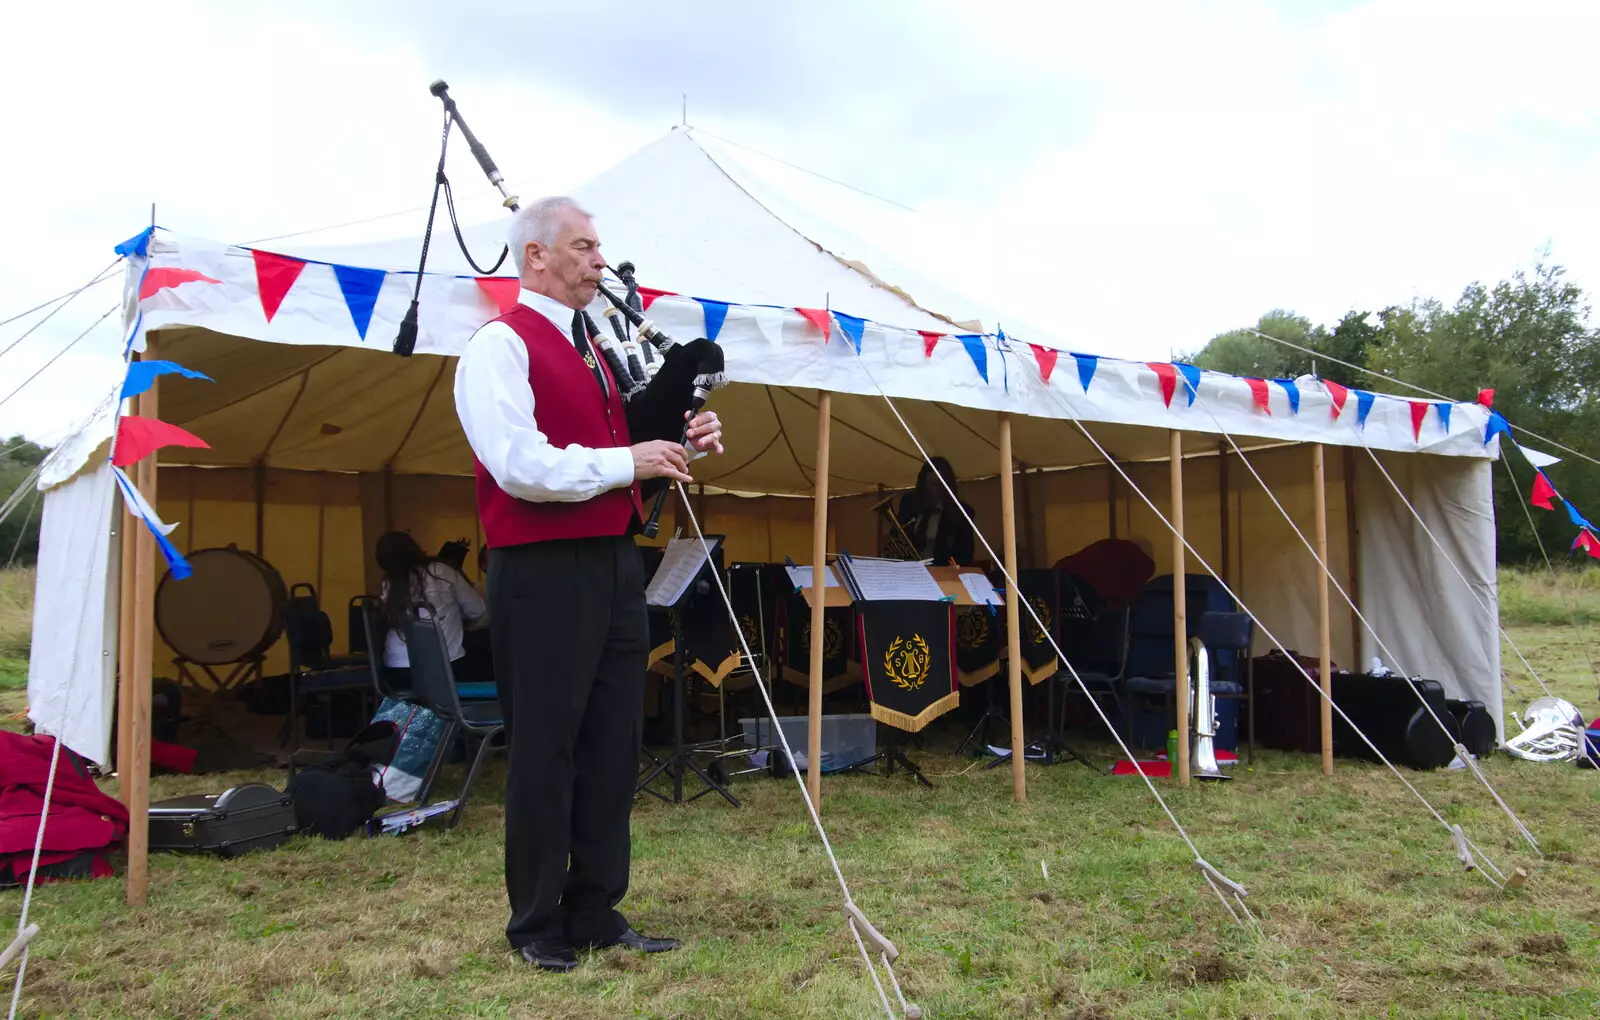 More bagpipe action, as the training band sets up, from Fred's Birthday and a GSB Duck-Race Miscellany, Brome, Eye and London - 28th September 2019